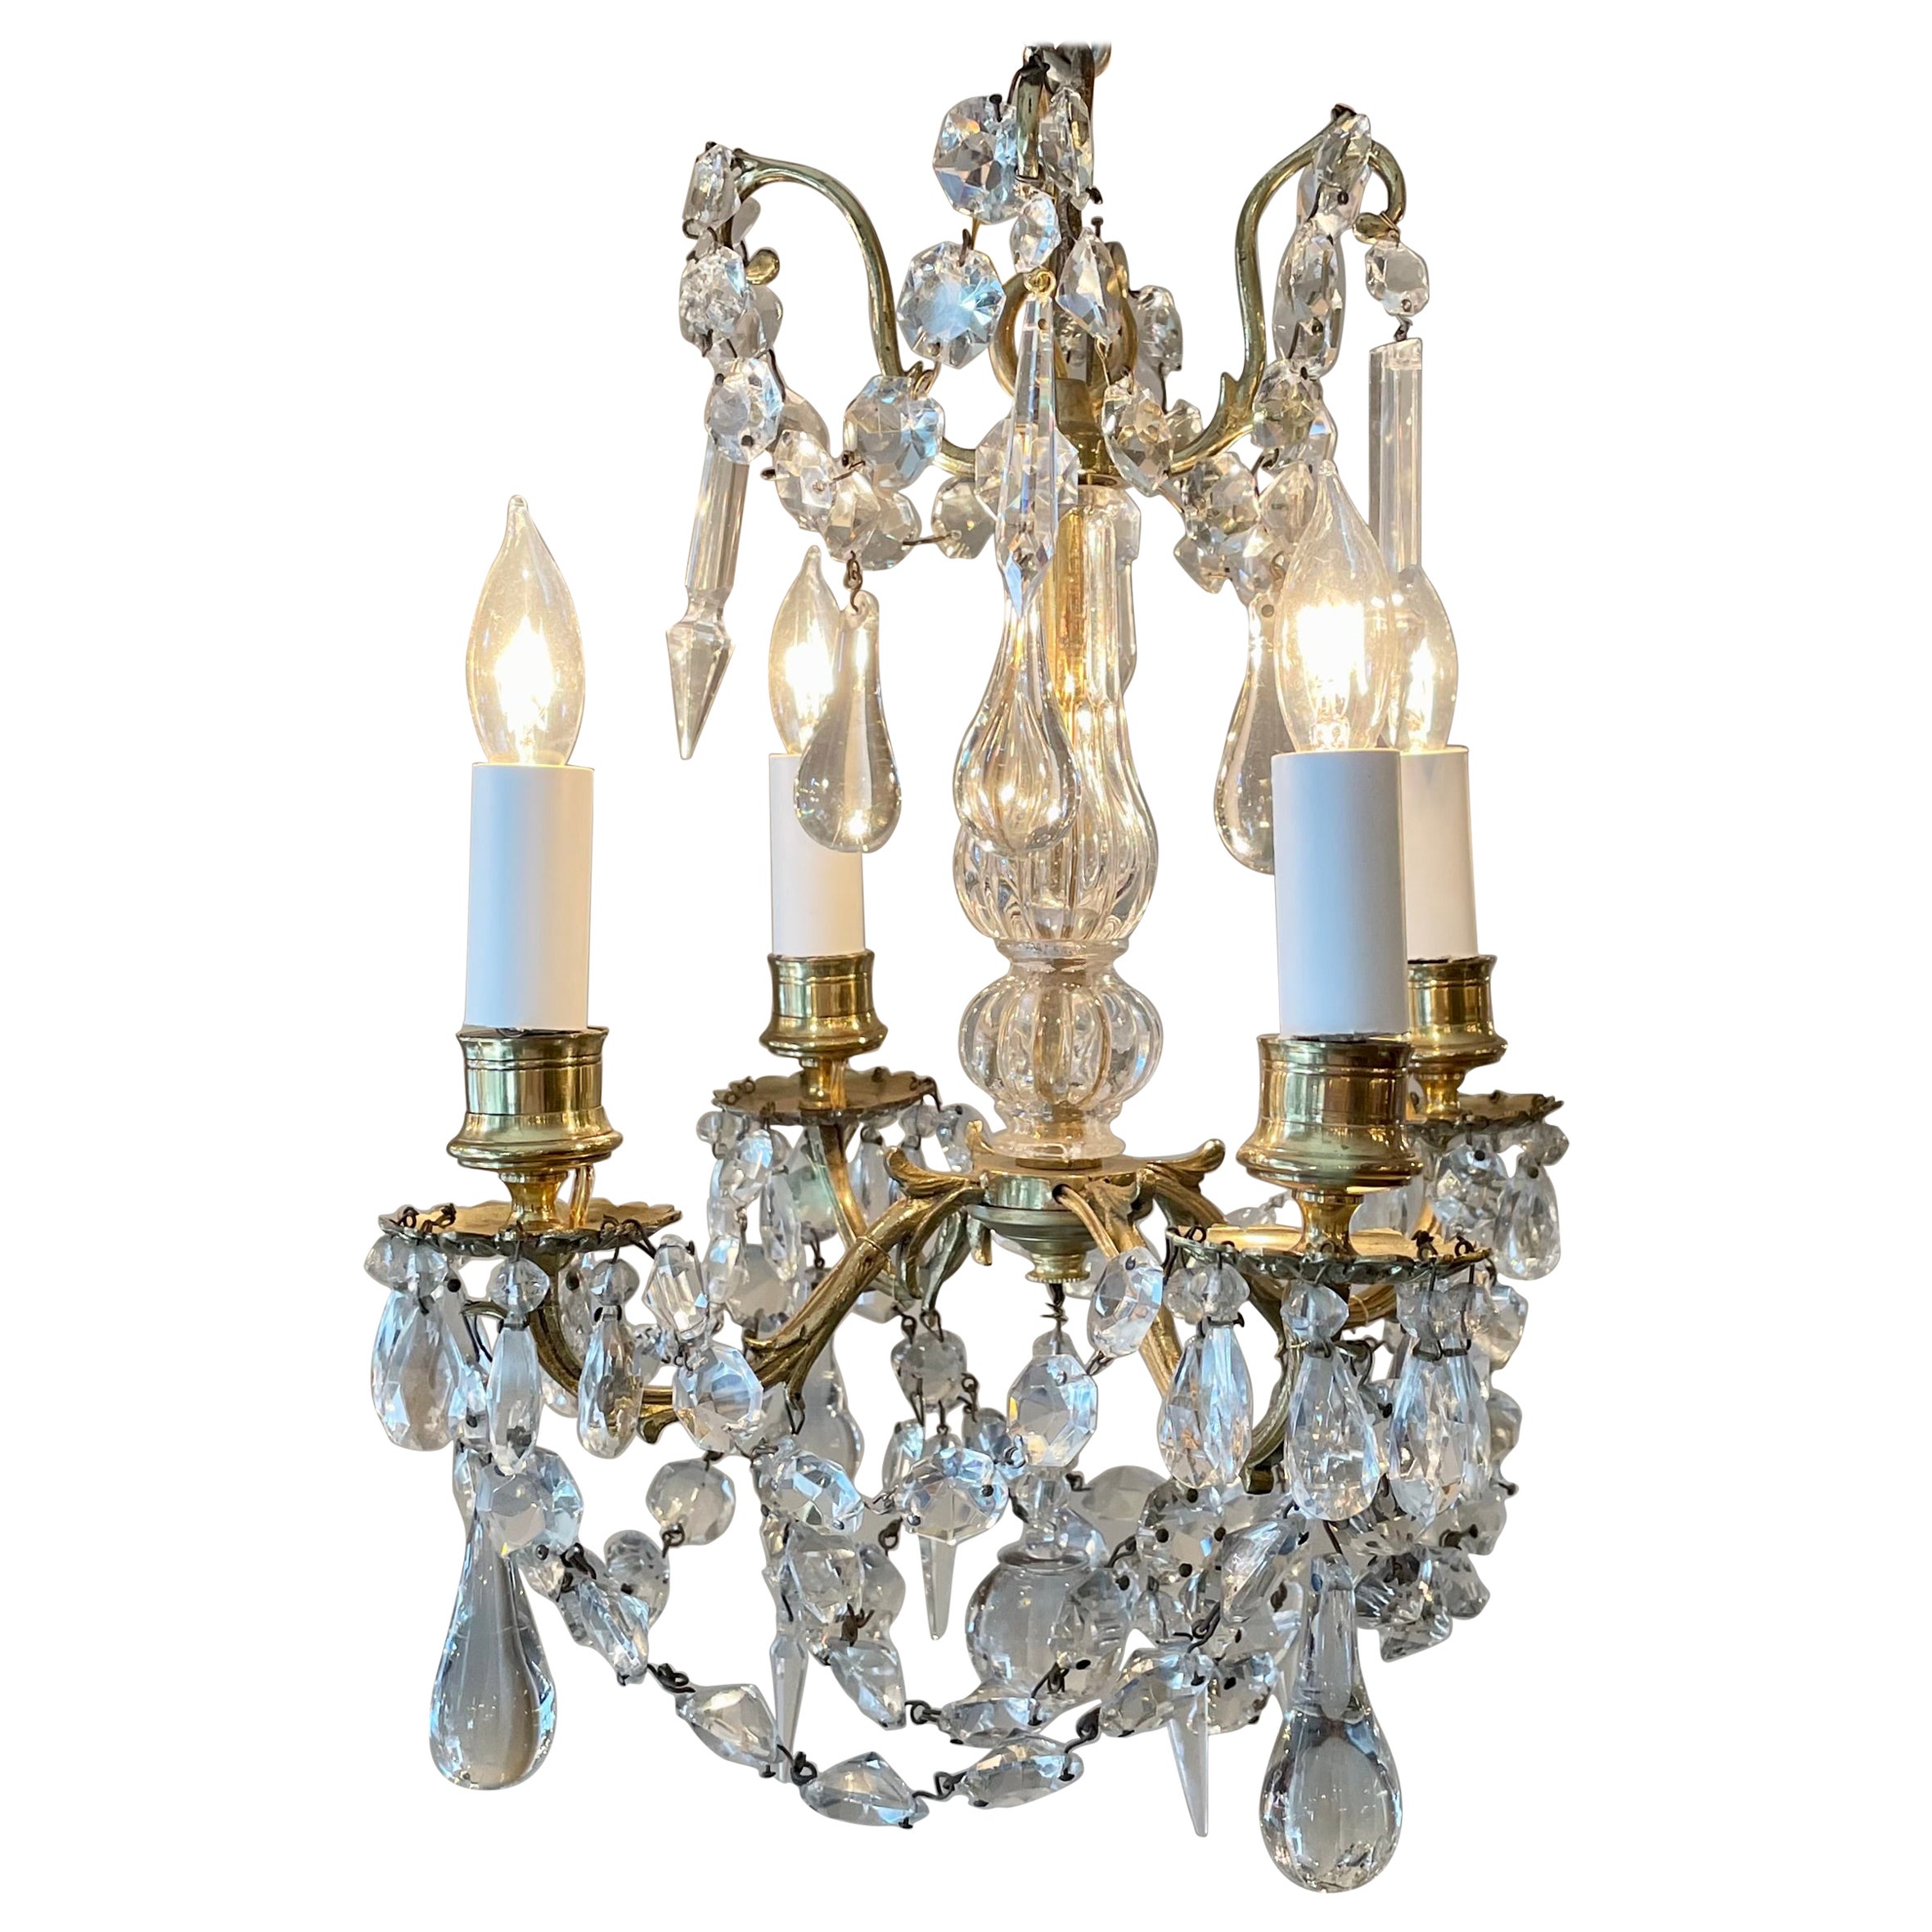 Antique French Crystal and Bronze Chandelier, circa 1890-1900